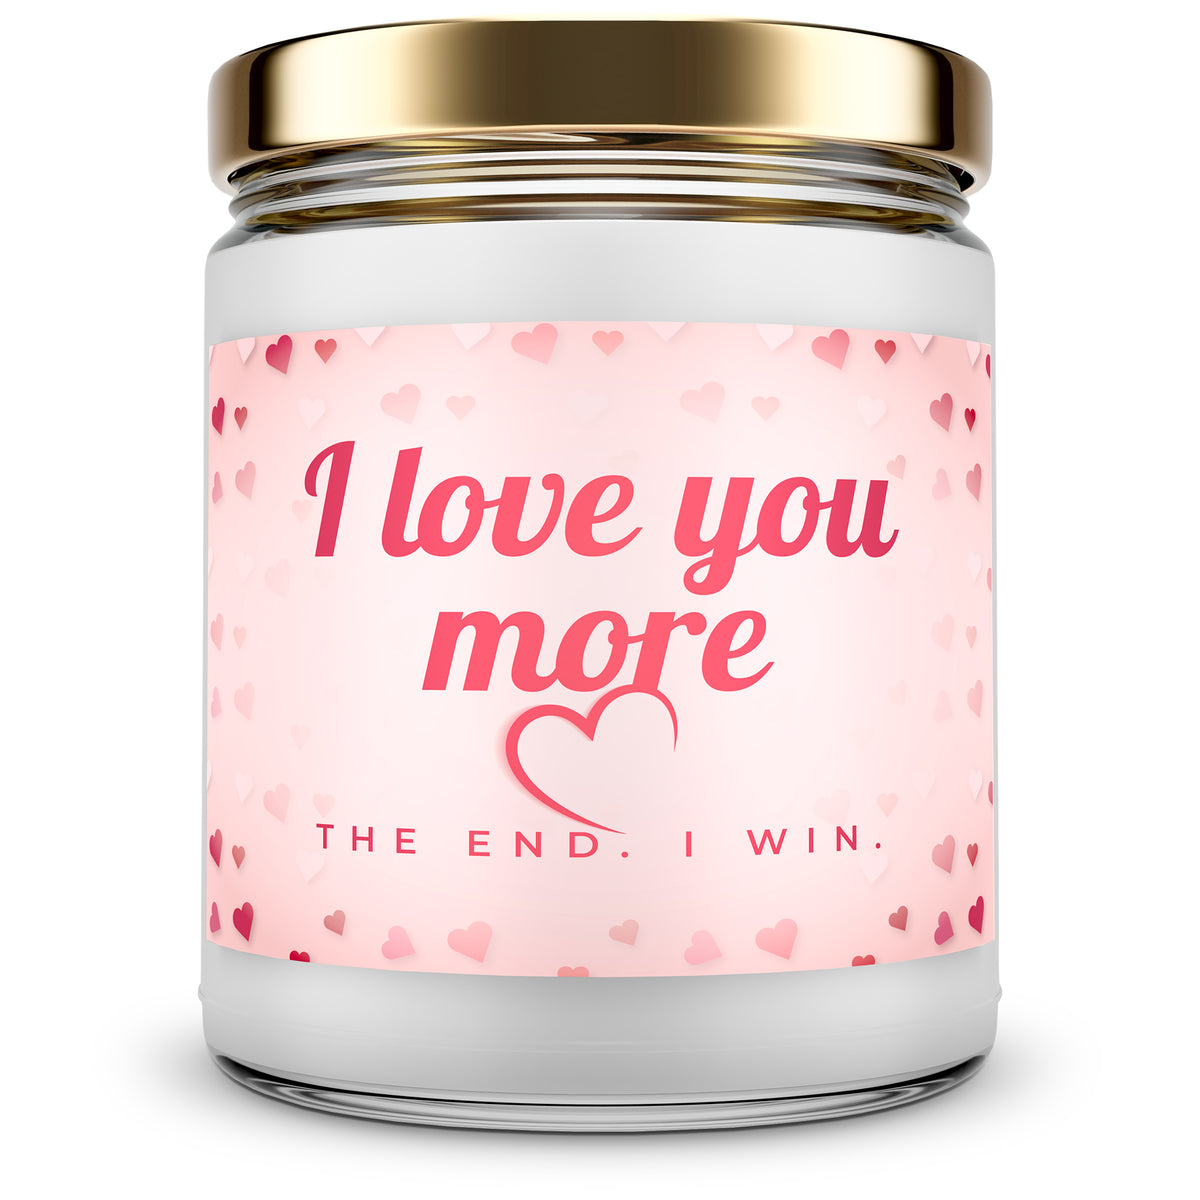 I love you more. The end. I win. - Mint Sugar Candle